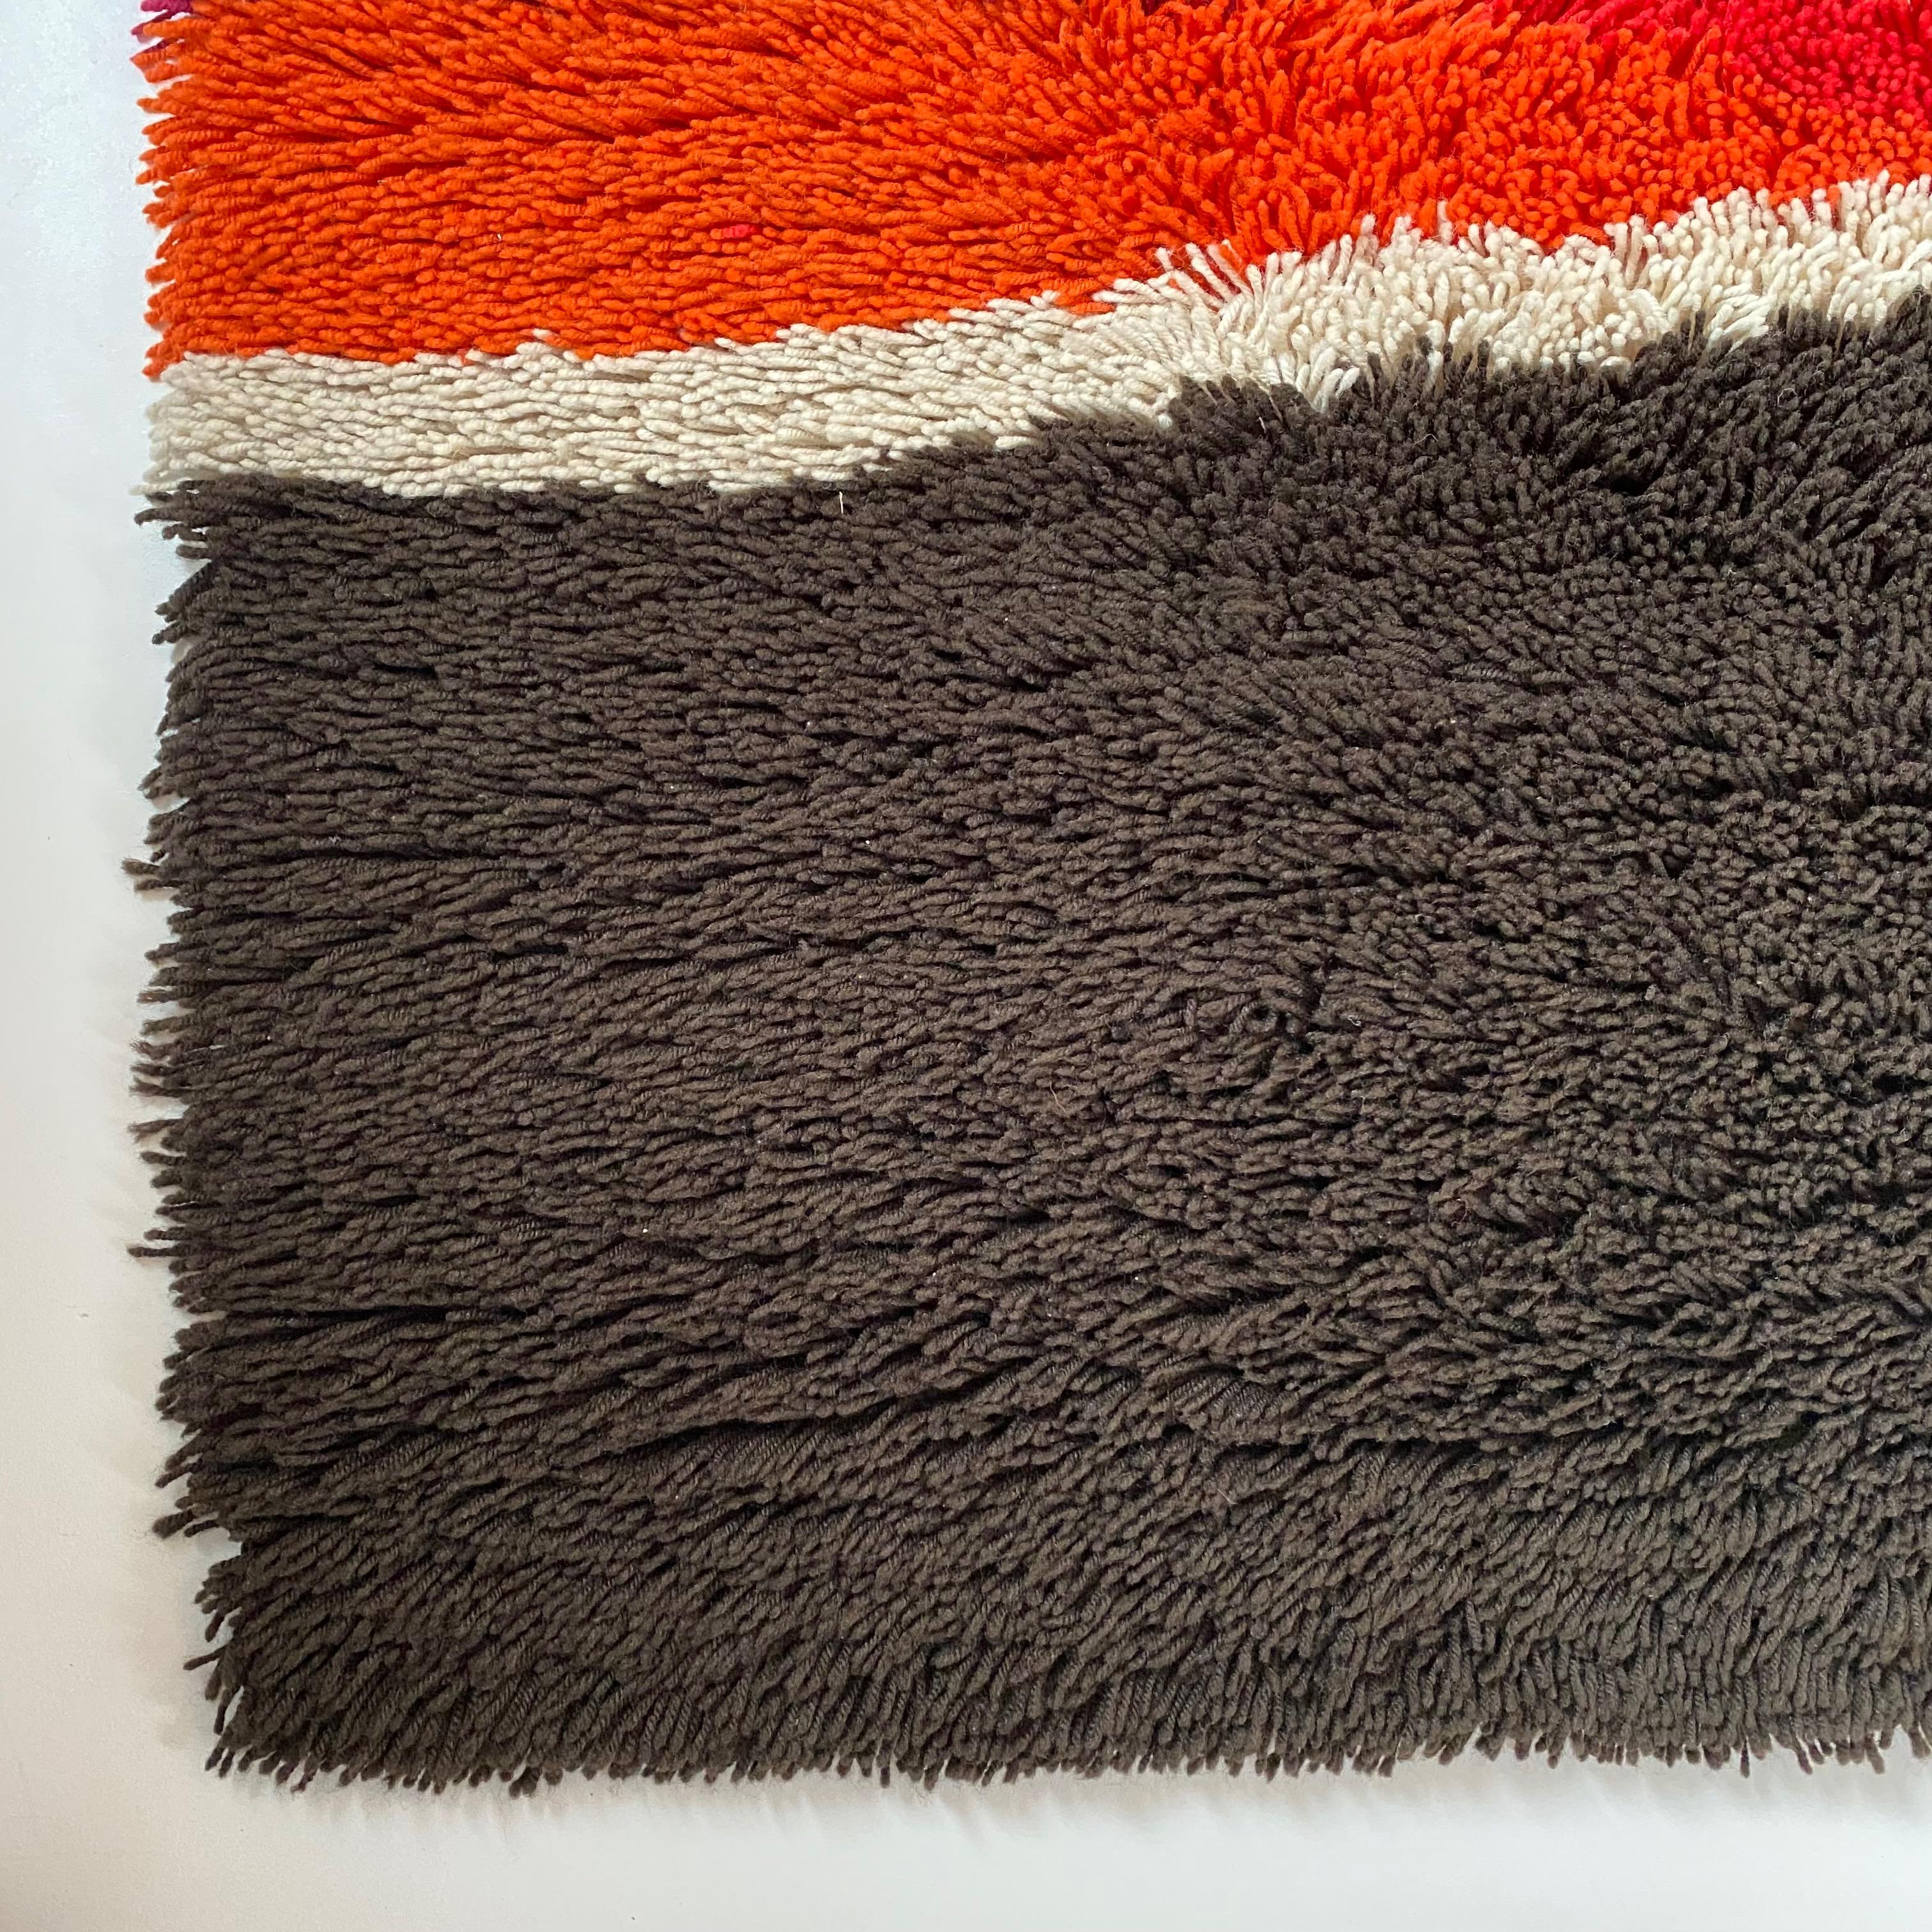 Acrylic Vintage Colorful Stripes Panton Style High Pile Rug by Desso, Netherlands, 1970 For Sale